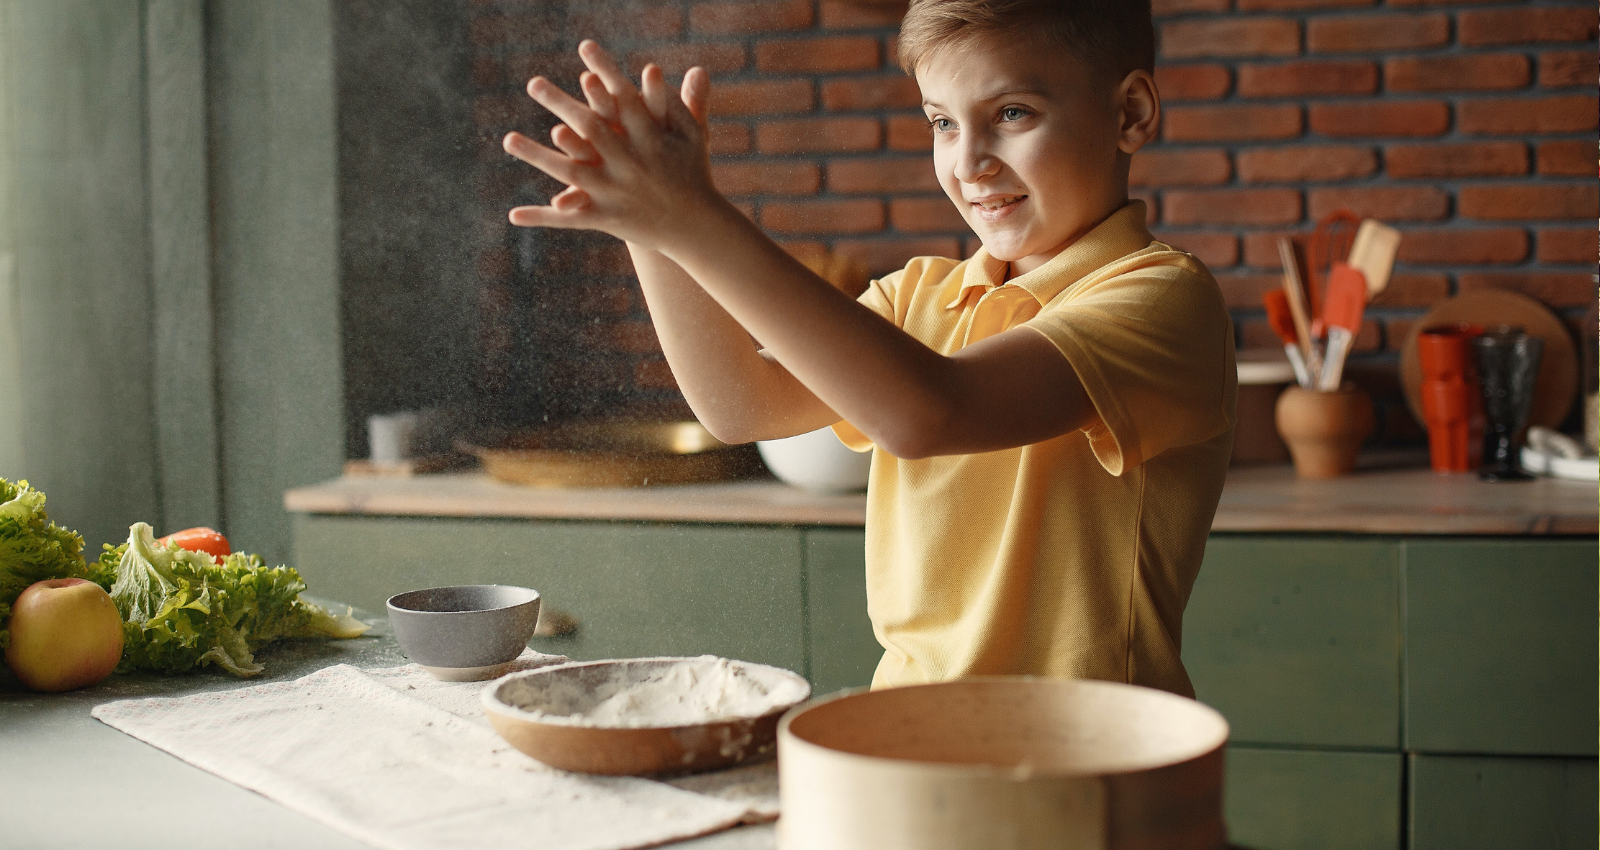 Teaching Kitchen Safety to Children with Special Needs